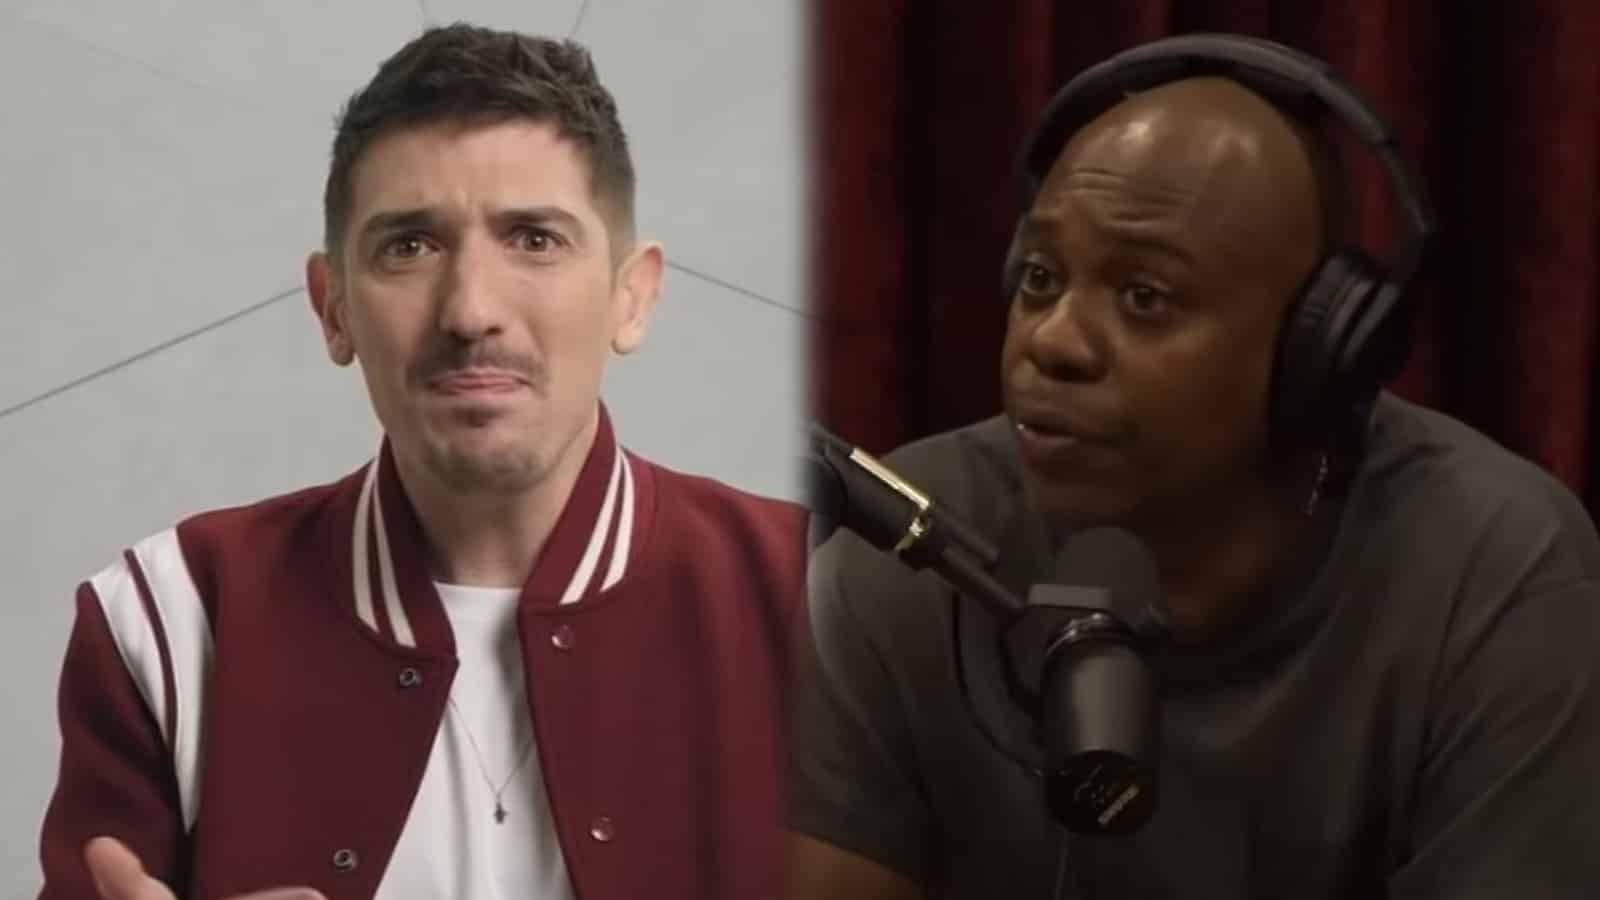 Andrew Schulz next to Dave Chapelle